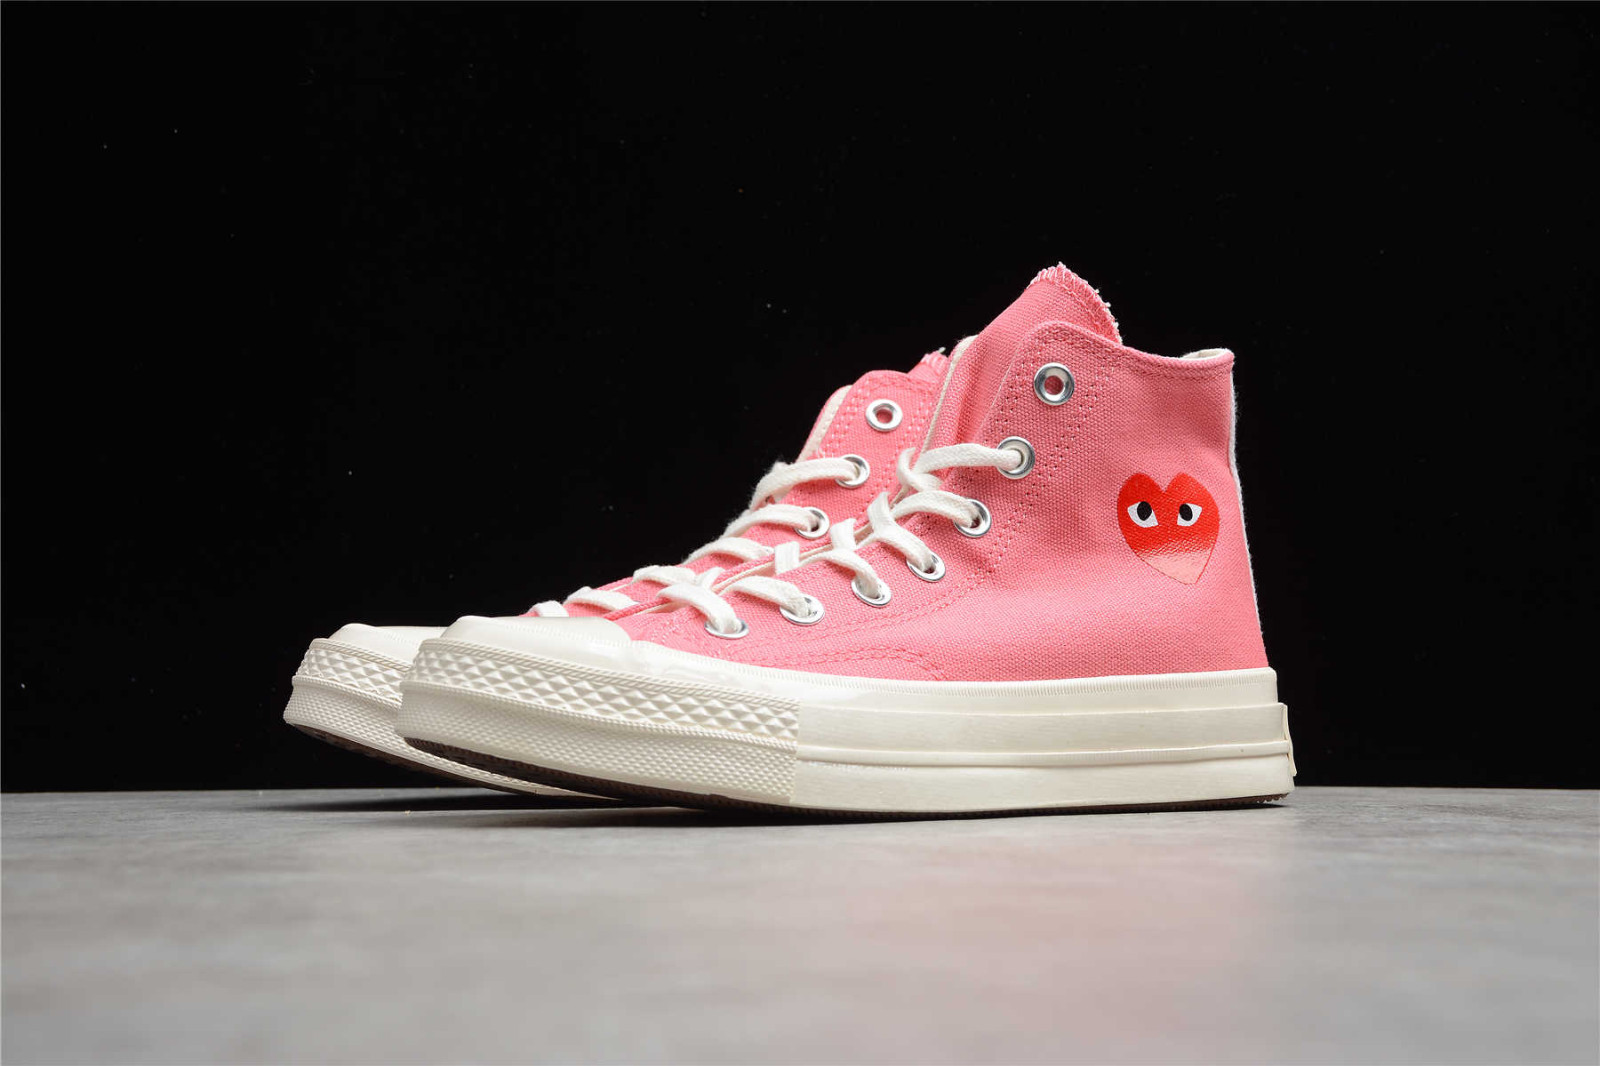 Comme des Garçons PLAY x NEIGHBORHOOD Converse Chuck Taylor All Star 70  High Bright Pink 168301C - StclaircomoShops - NEIGHBORHOOD Converse Japans  Timeline Collection is Period Correct